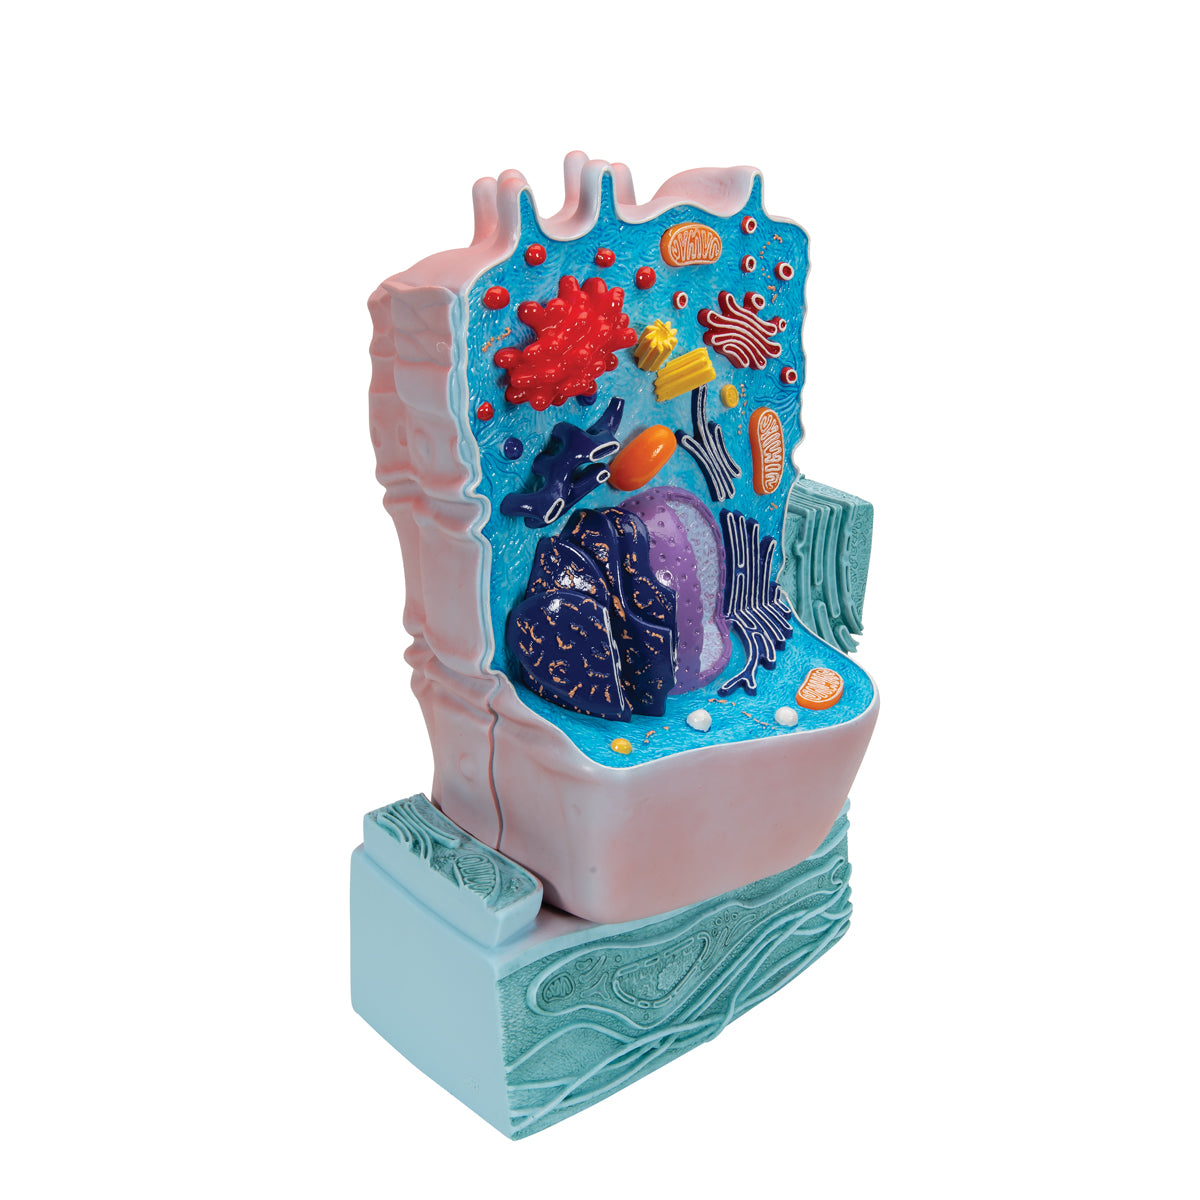 Highly detailed model of a cell in an electron microscopic perspective